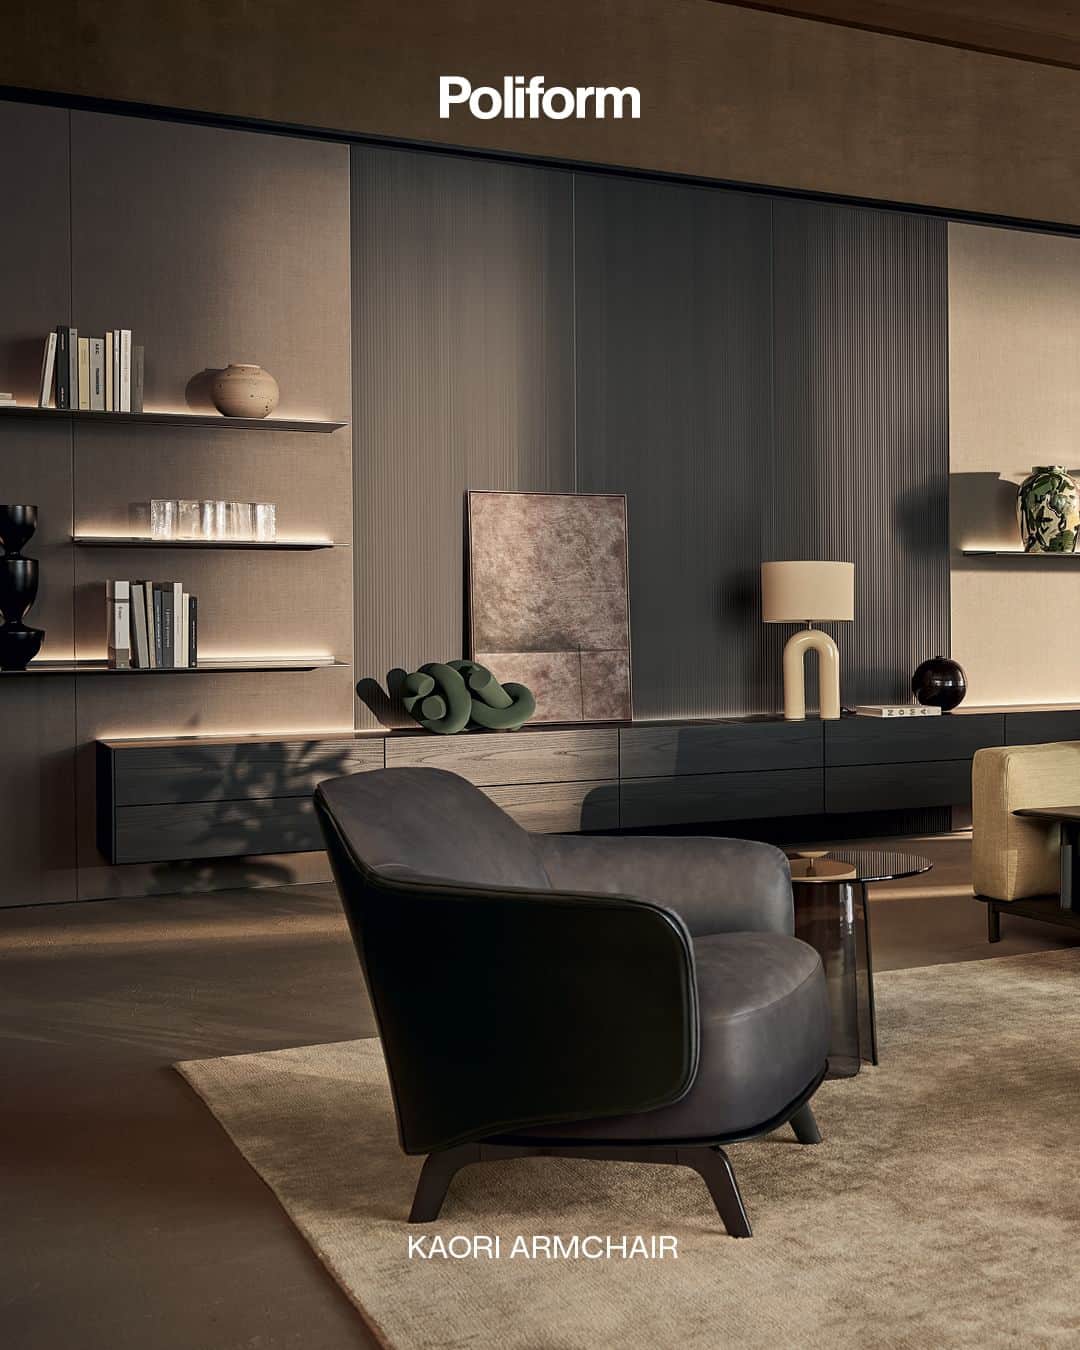 Poliform|Varennaのインスタグラム：「A living room that perfectly combines the architectural lines of the Brera sofa with the enveloping curves of the Kaori armchair. An ideal island of comfort. Discover more on the Poliform collection for the living area on poliform.com.  #poliform #design #madeinitaly #home #homedesign #livingroom #poliformhome #poliformnews #poliformnovelties #poliformnewcollection #poliformsofa #poliformlivingcollection #poliformbrera #brerasofa #poliformarmchair #poliformkaori #kaoriarmchair #poliforrmnewhome #poliformlyfestyle」